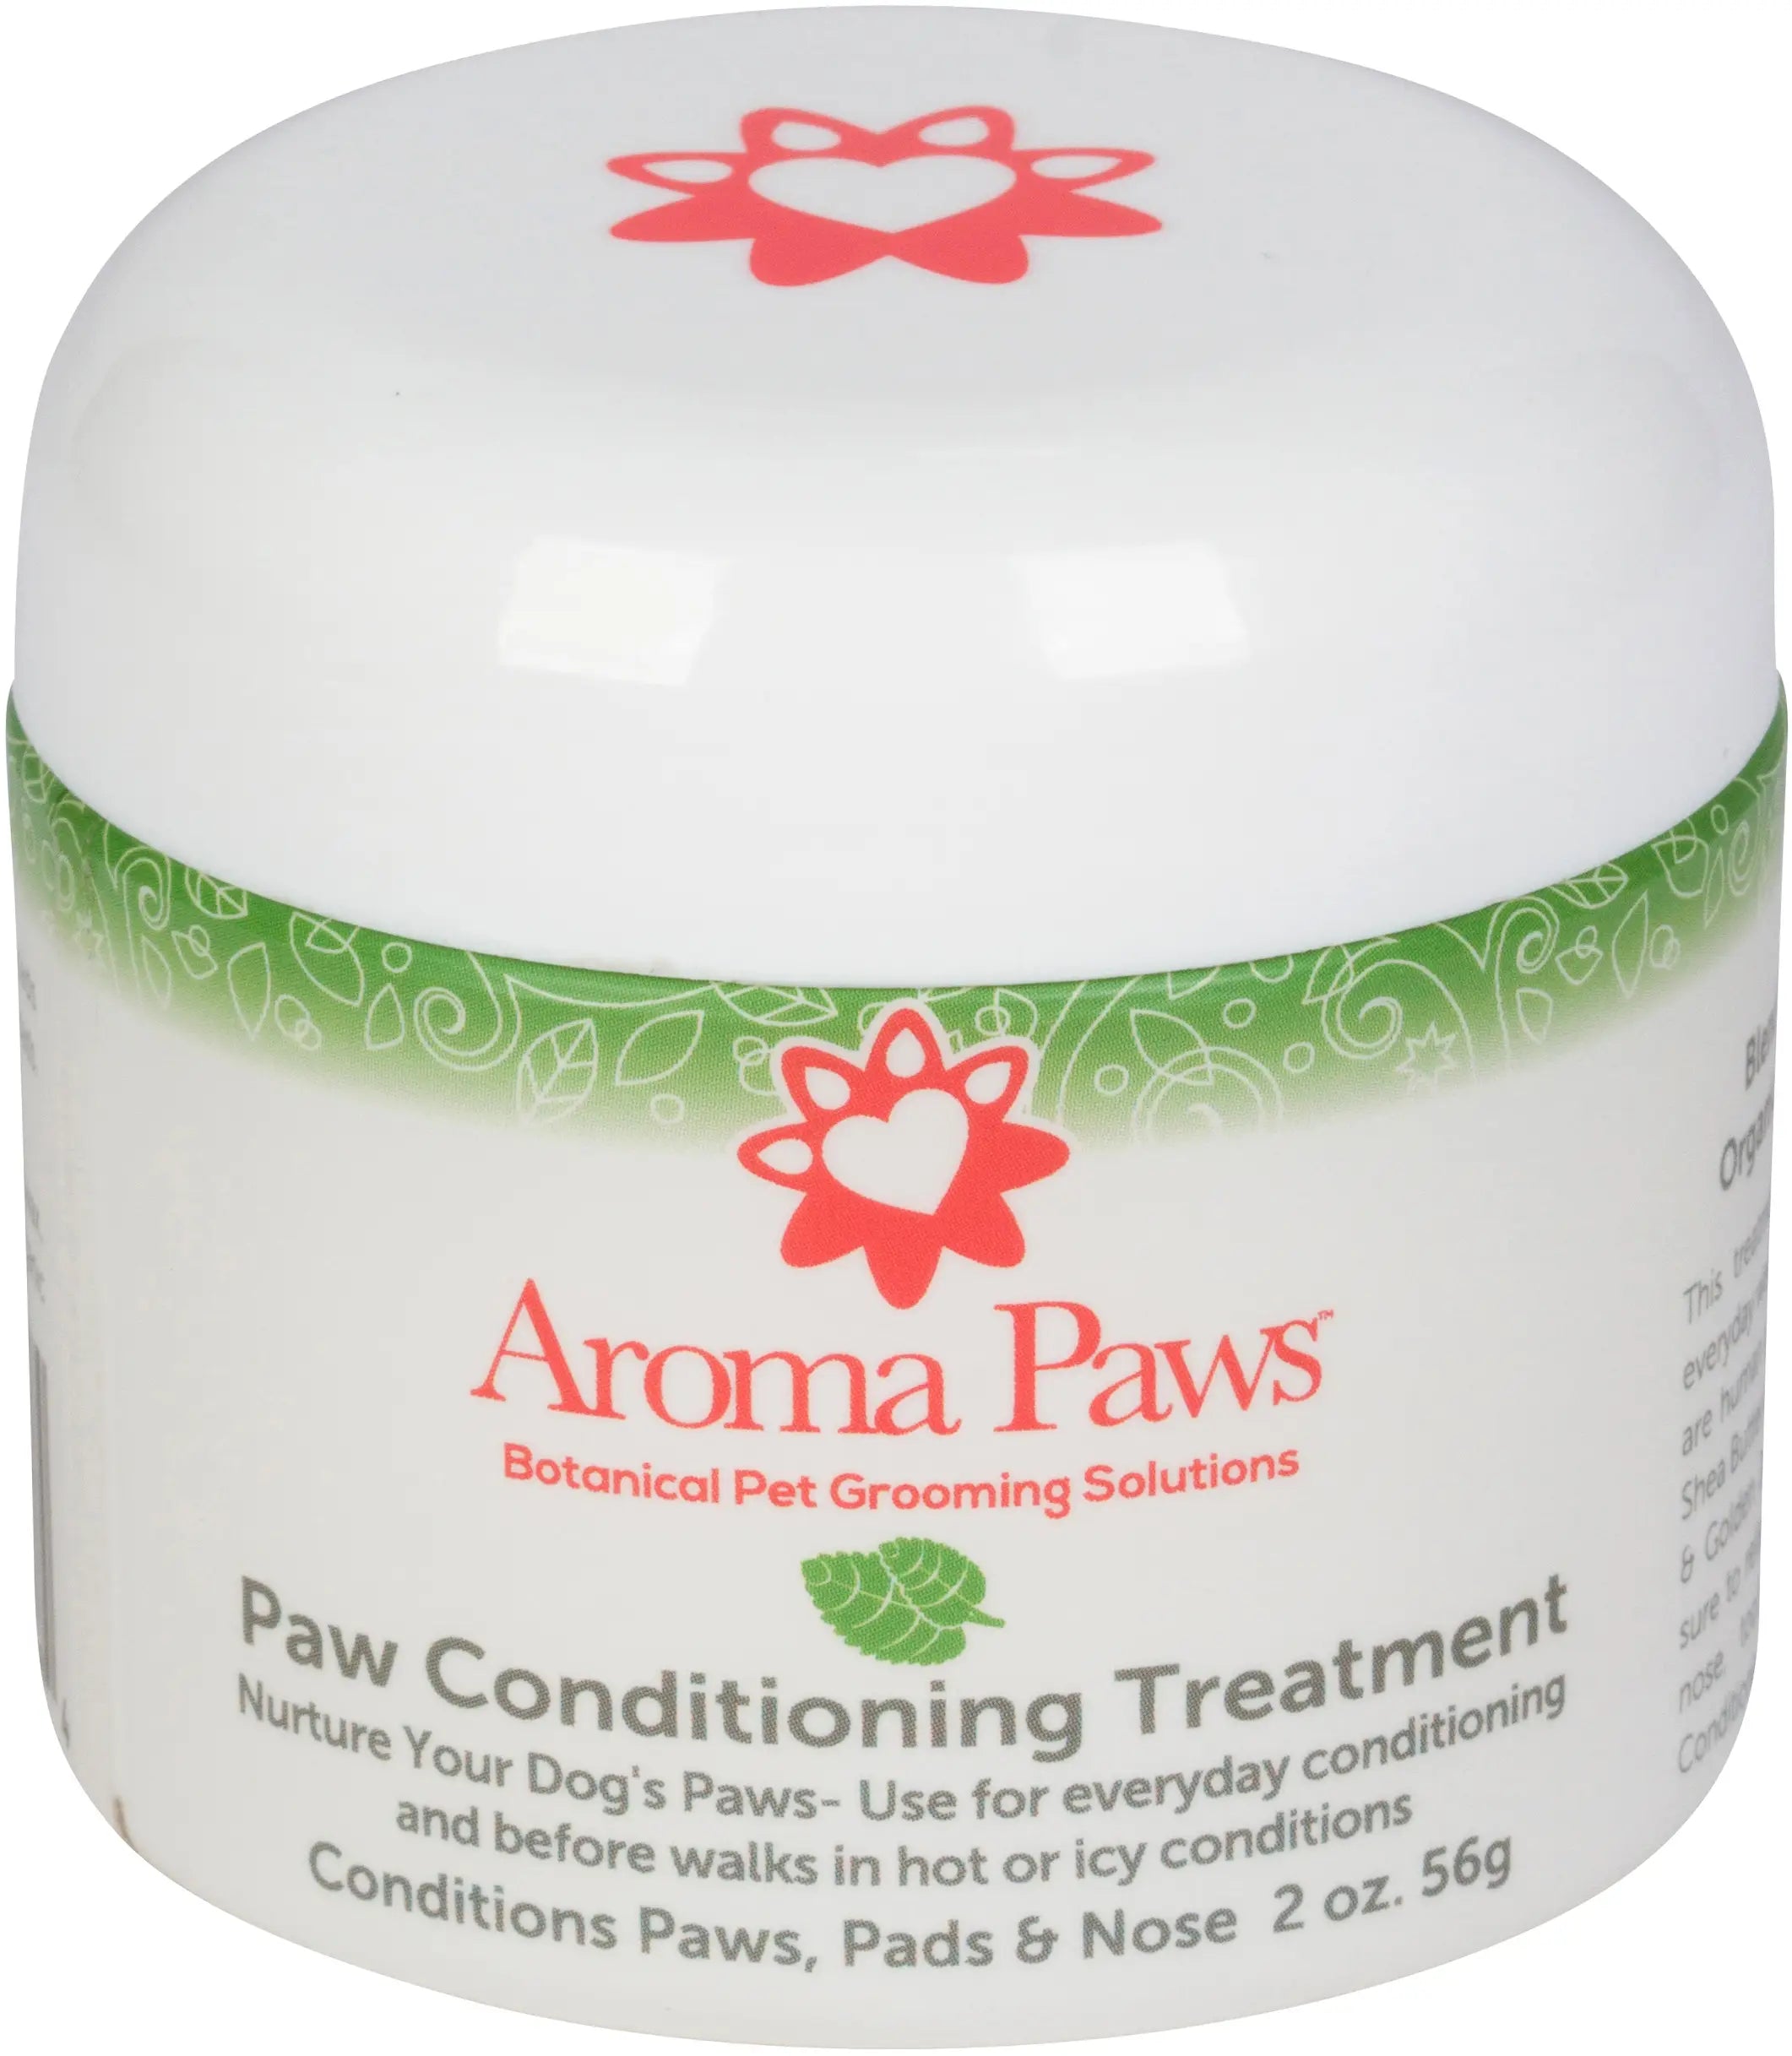 Paw Conditioning Treatment by Aroma Paws